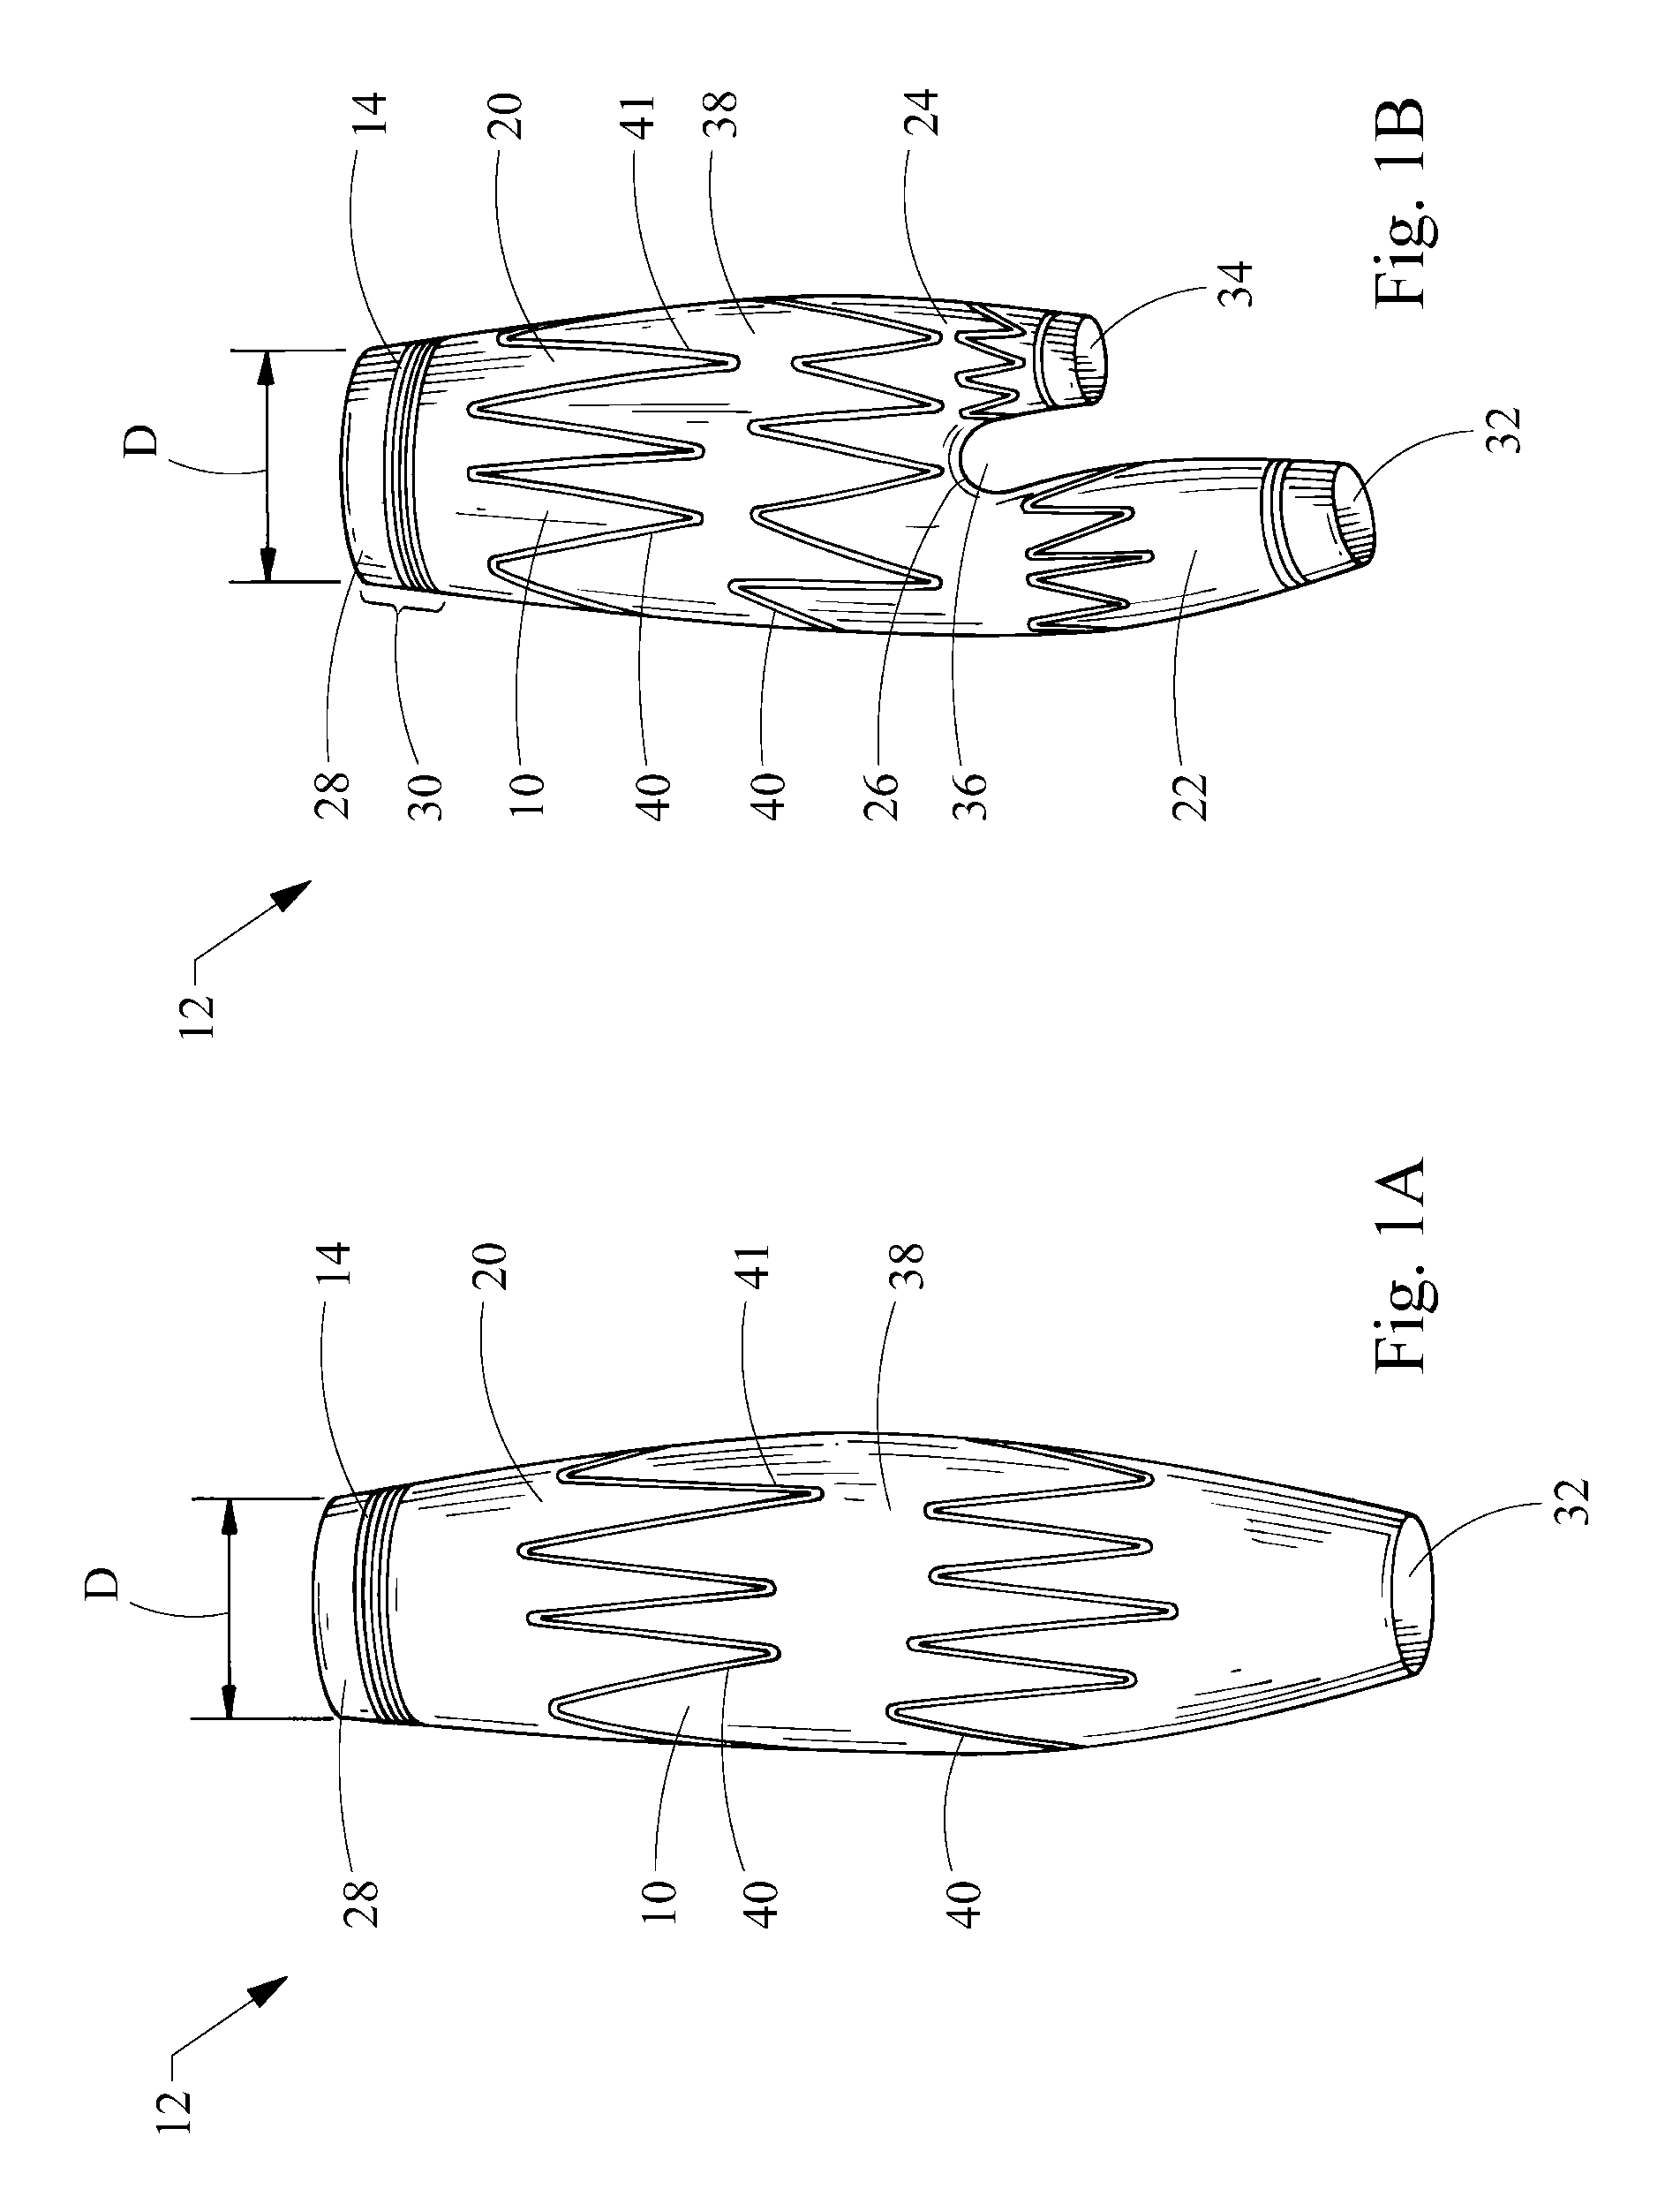 Endoluminal device including a mechanism for proximal or distal fixation, and sealing and methods of use thereof